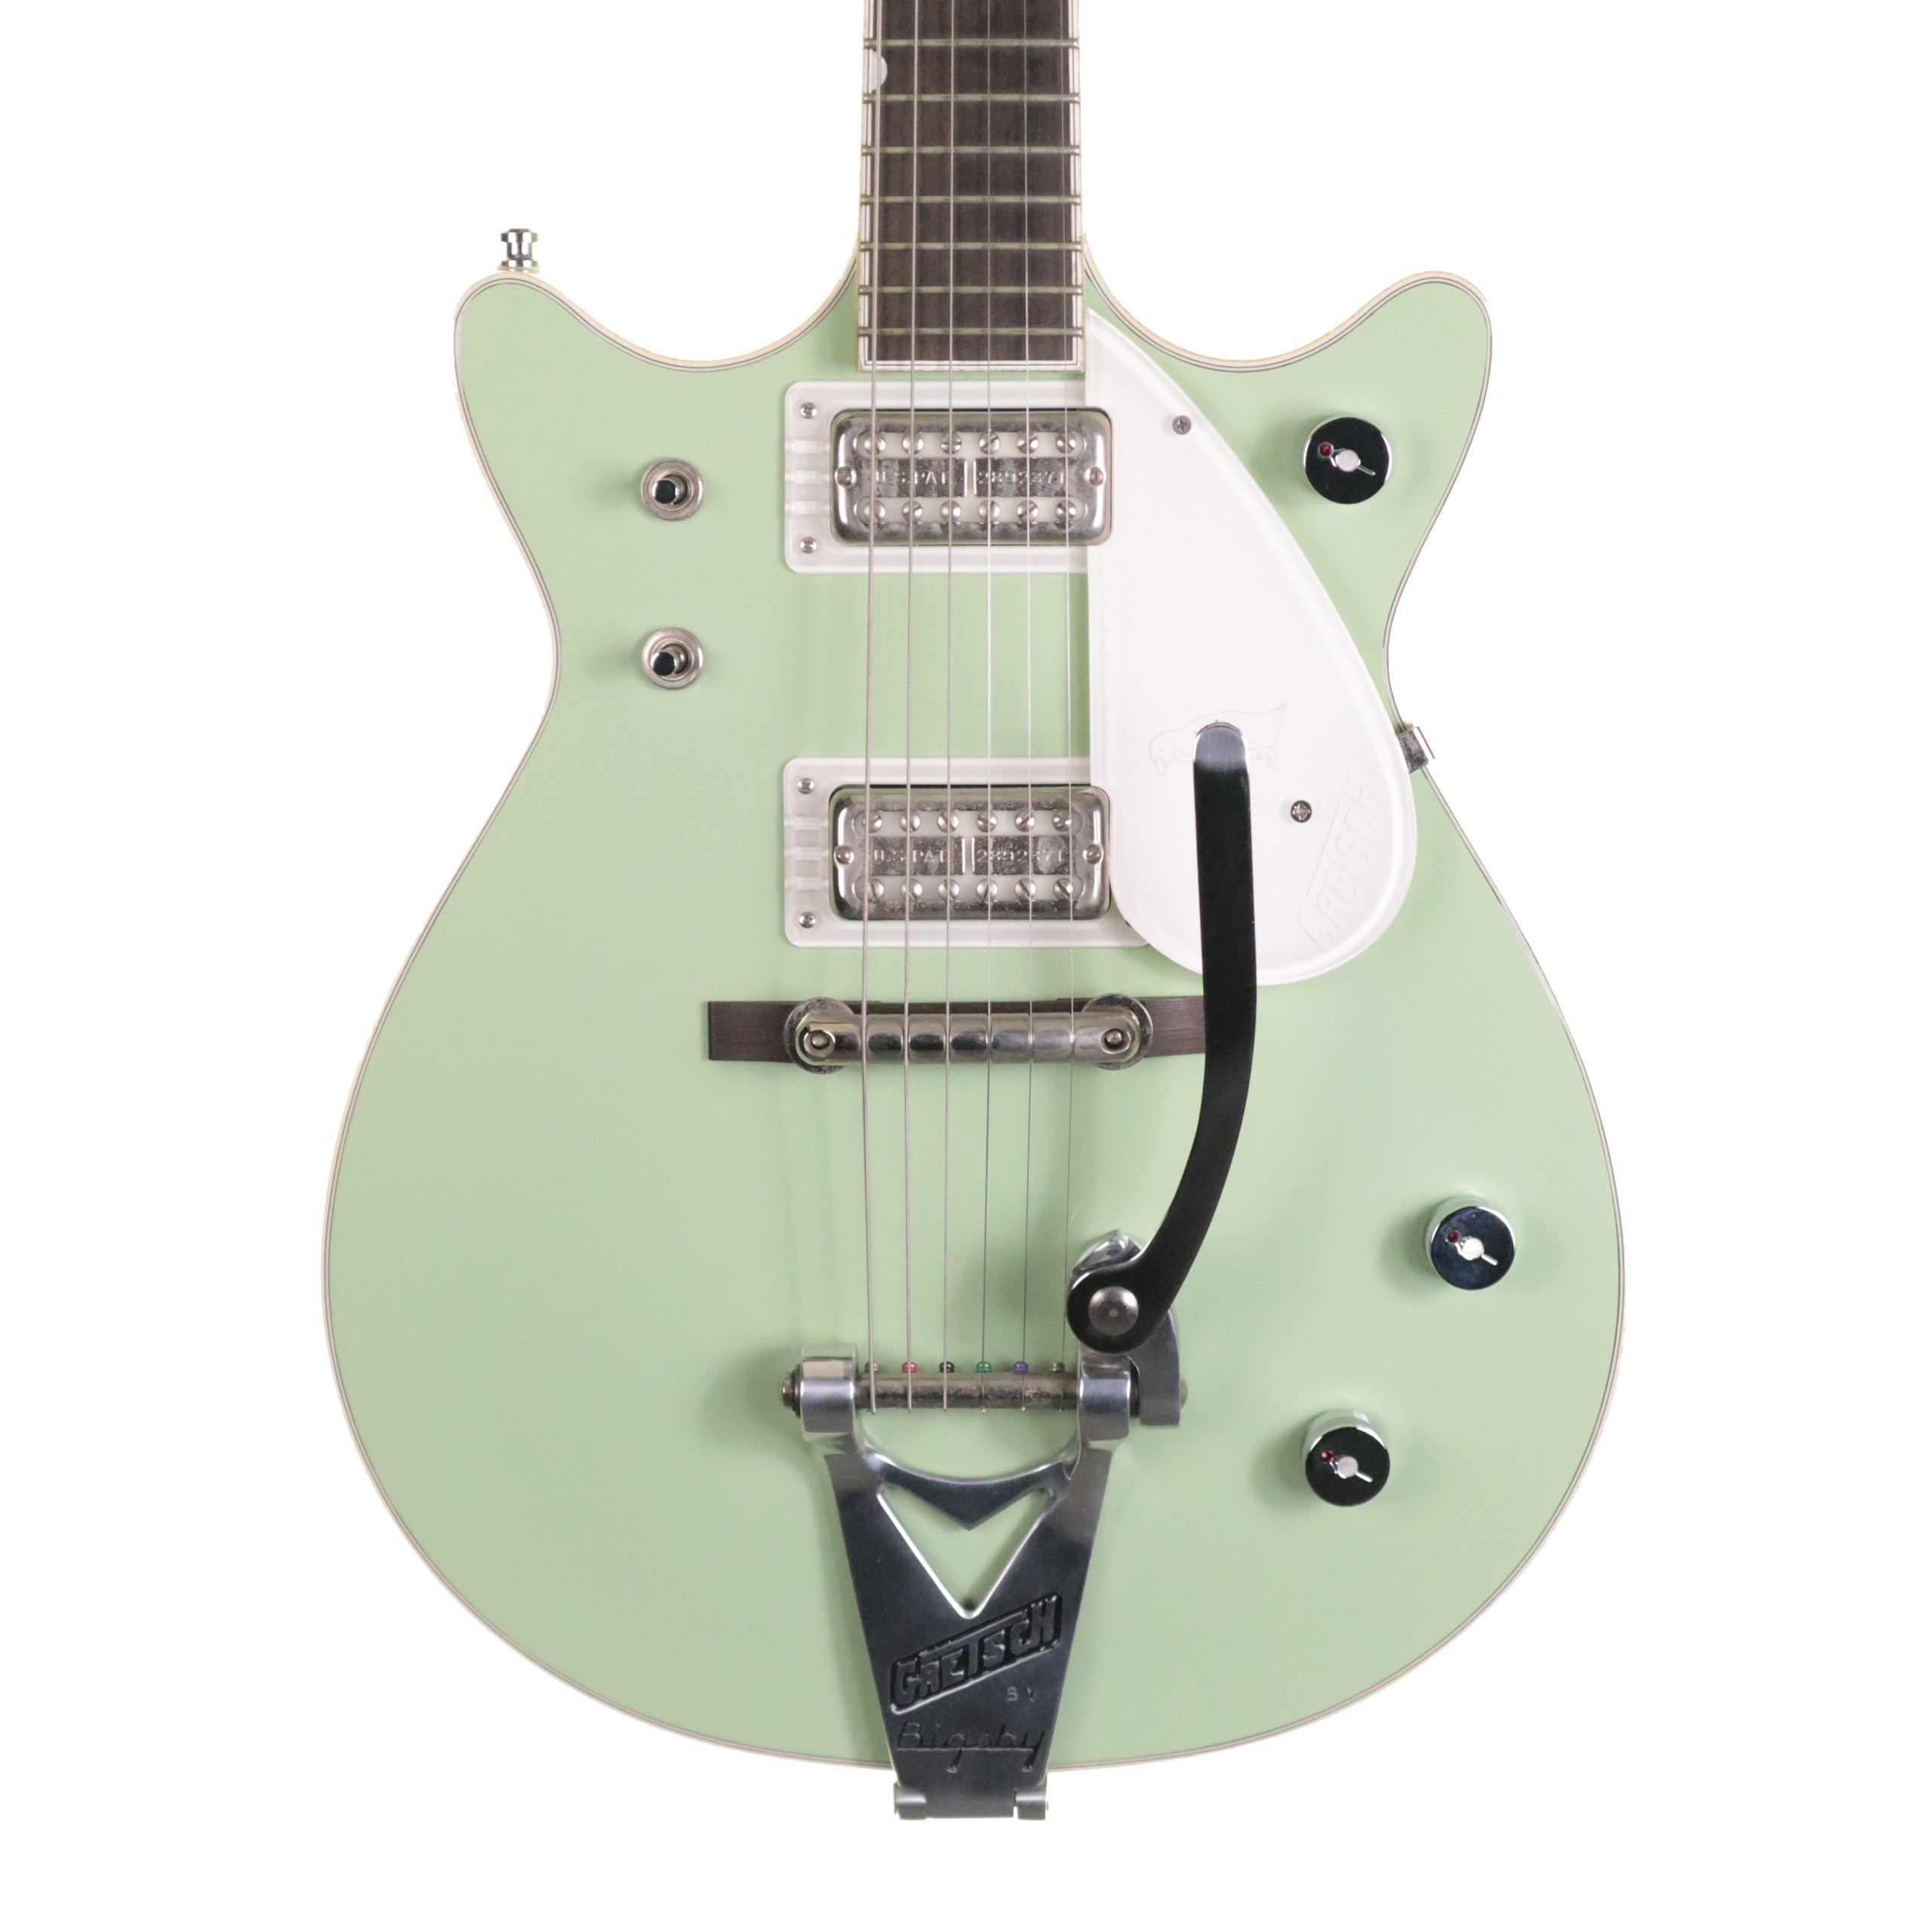 Gretsch G6134TDC-LTD15 Penguin Guitar, Broadway Jade with Case (Pre-Owned)